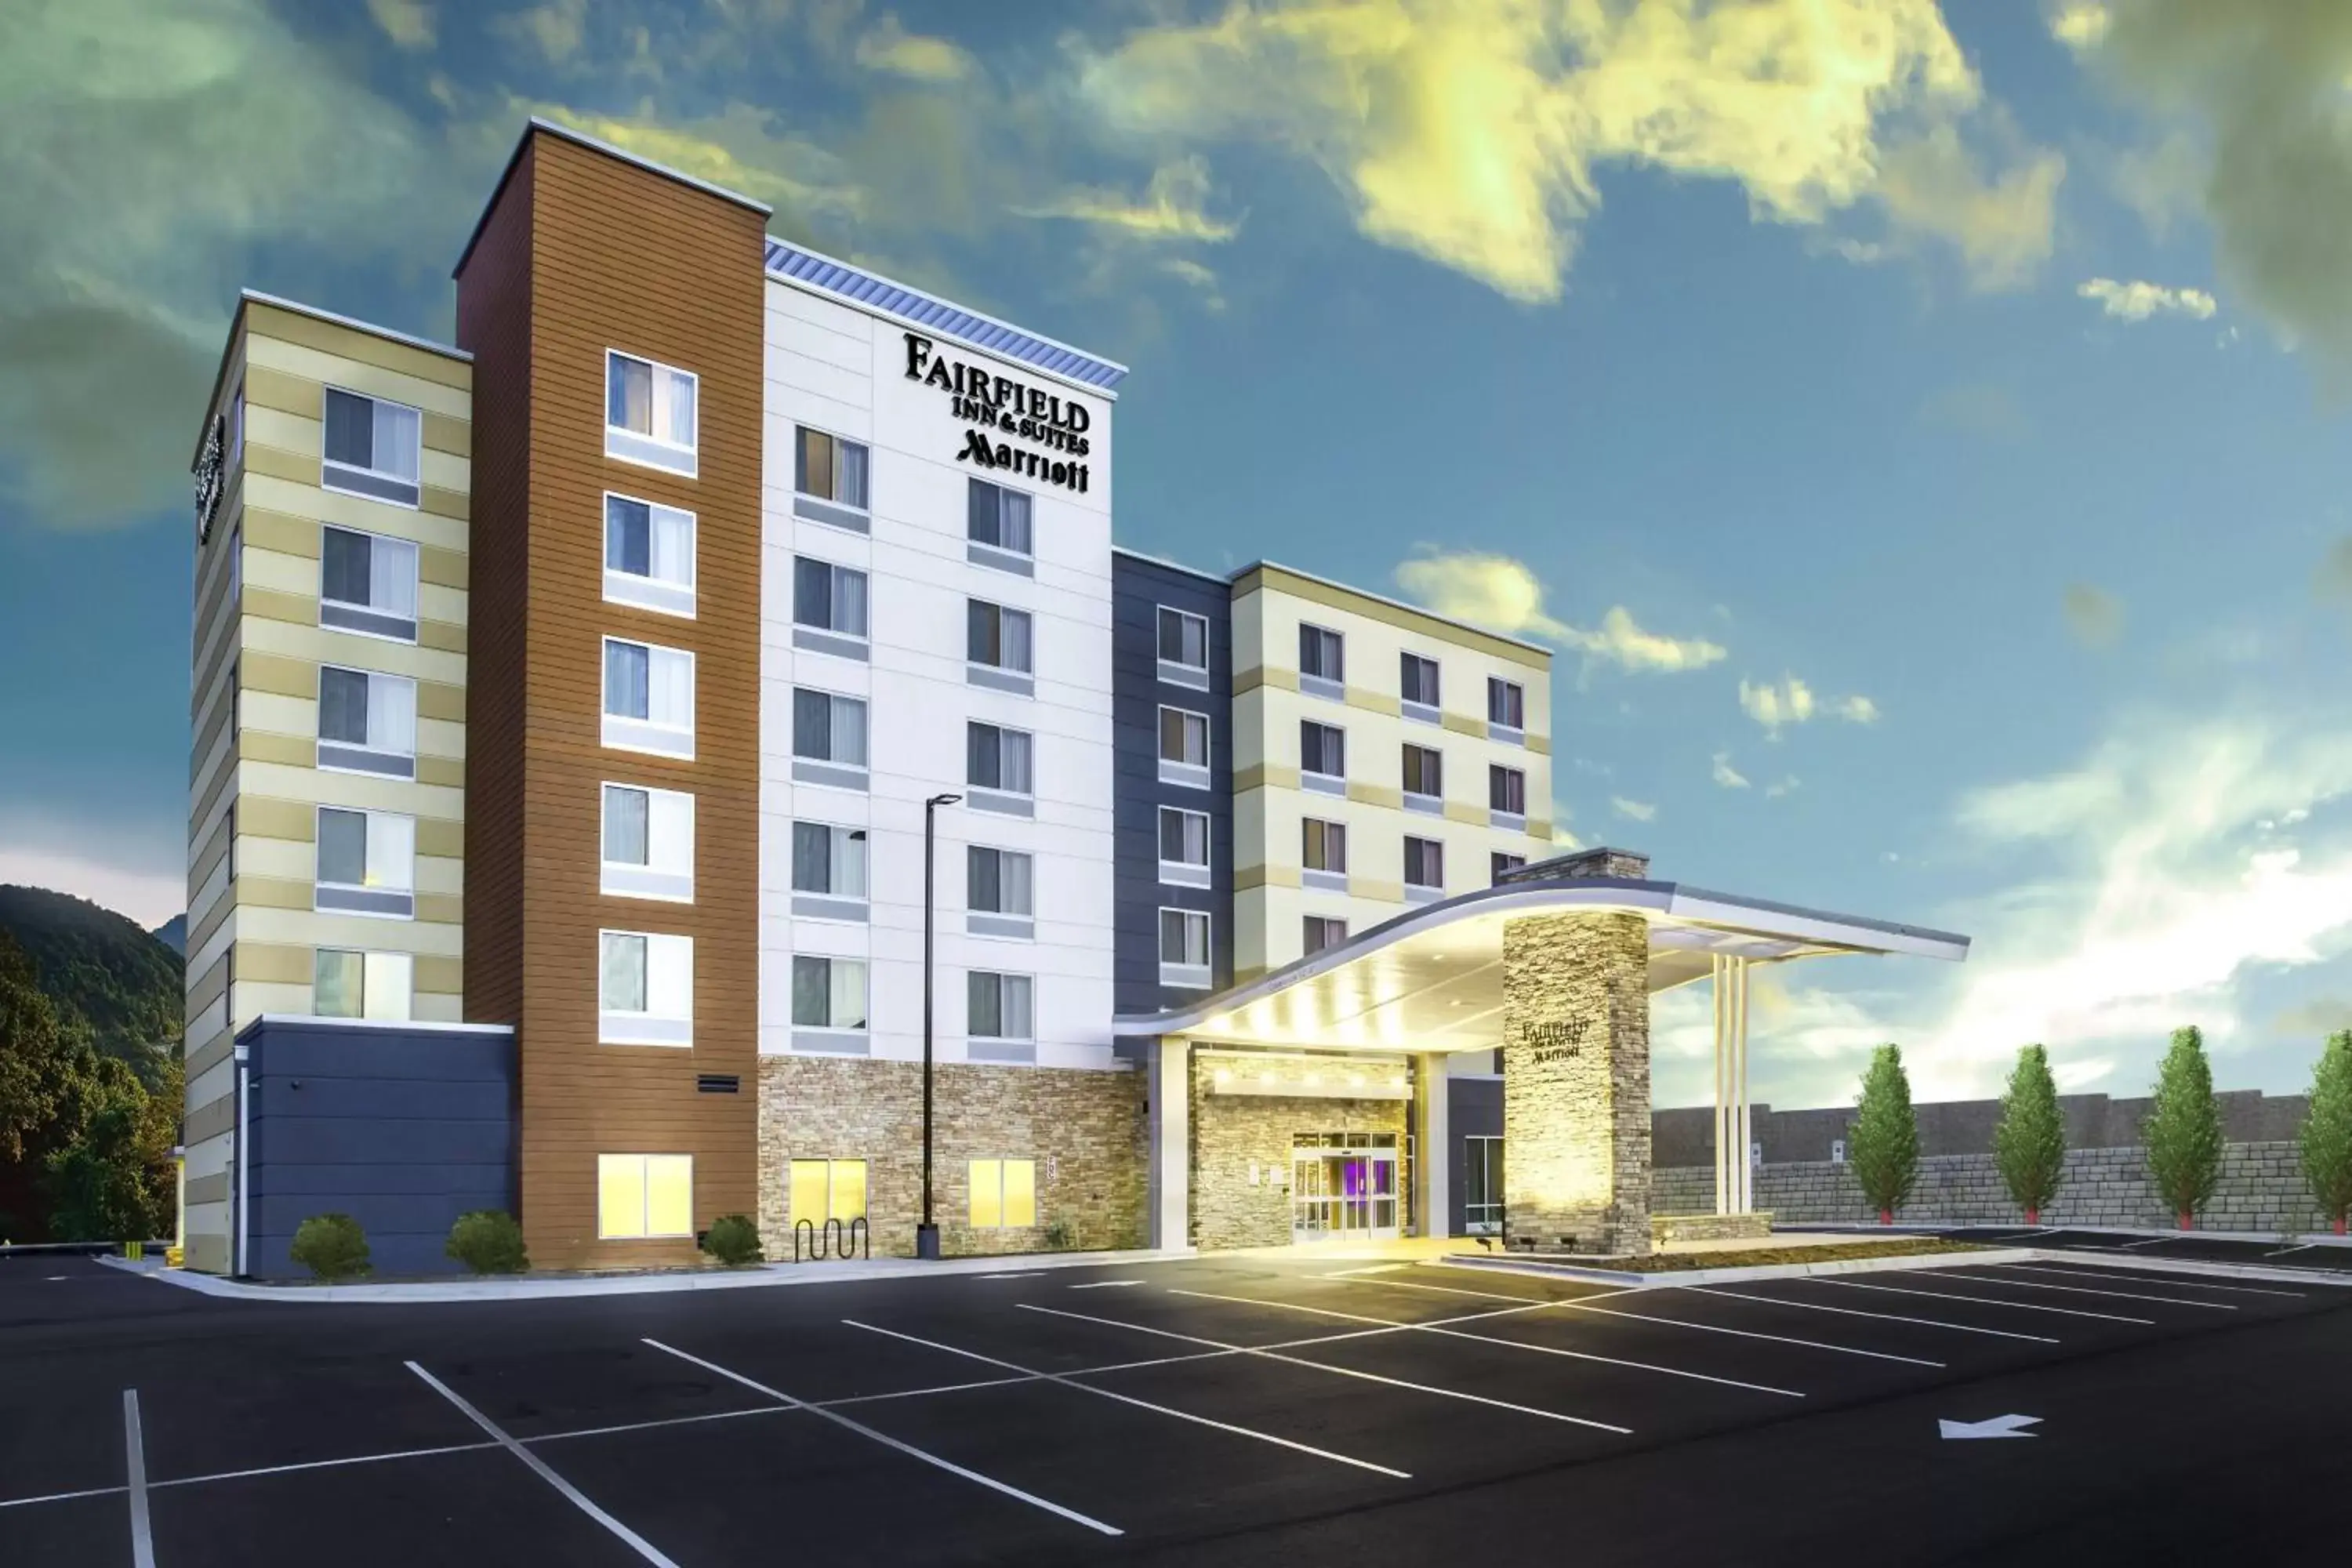 Property Building in Fairfield Inn & Suites by Marriott Asheville Tunnel Road